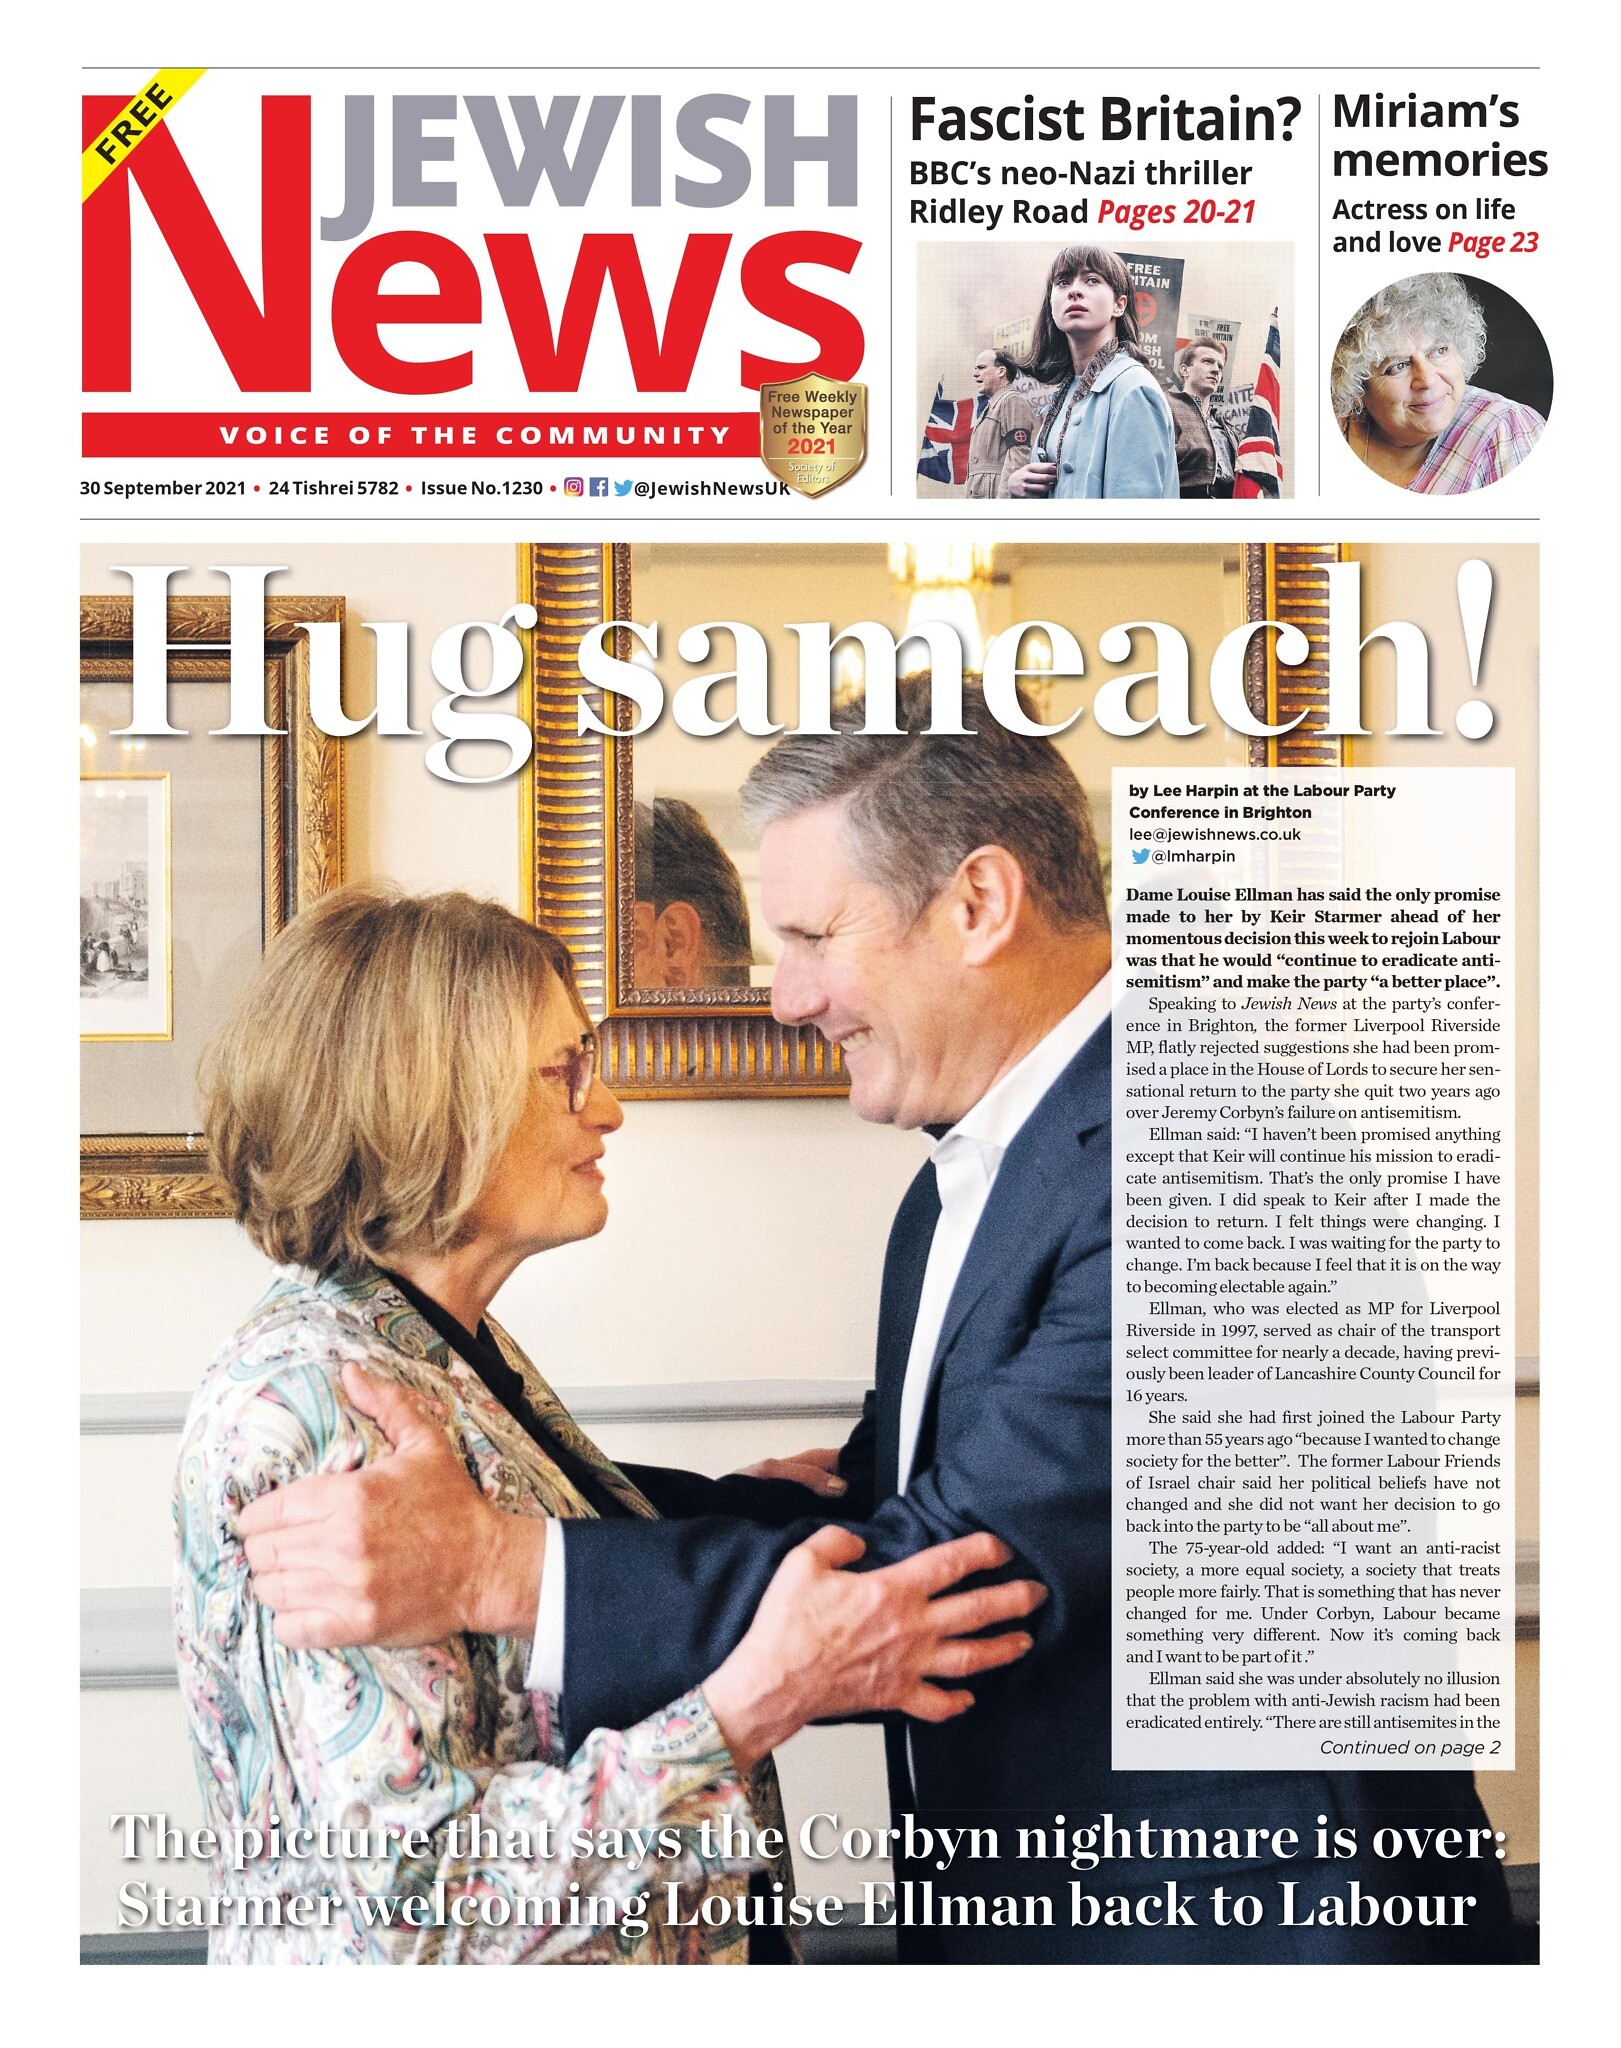 This week's front page